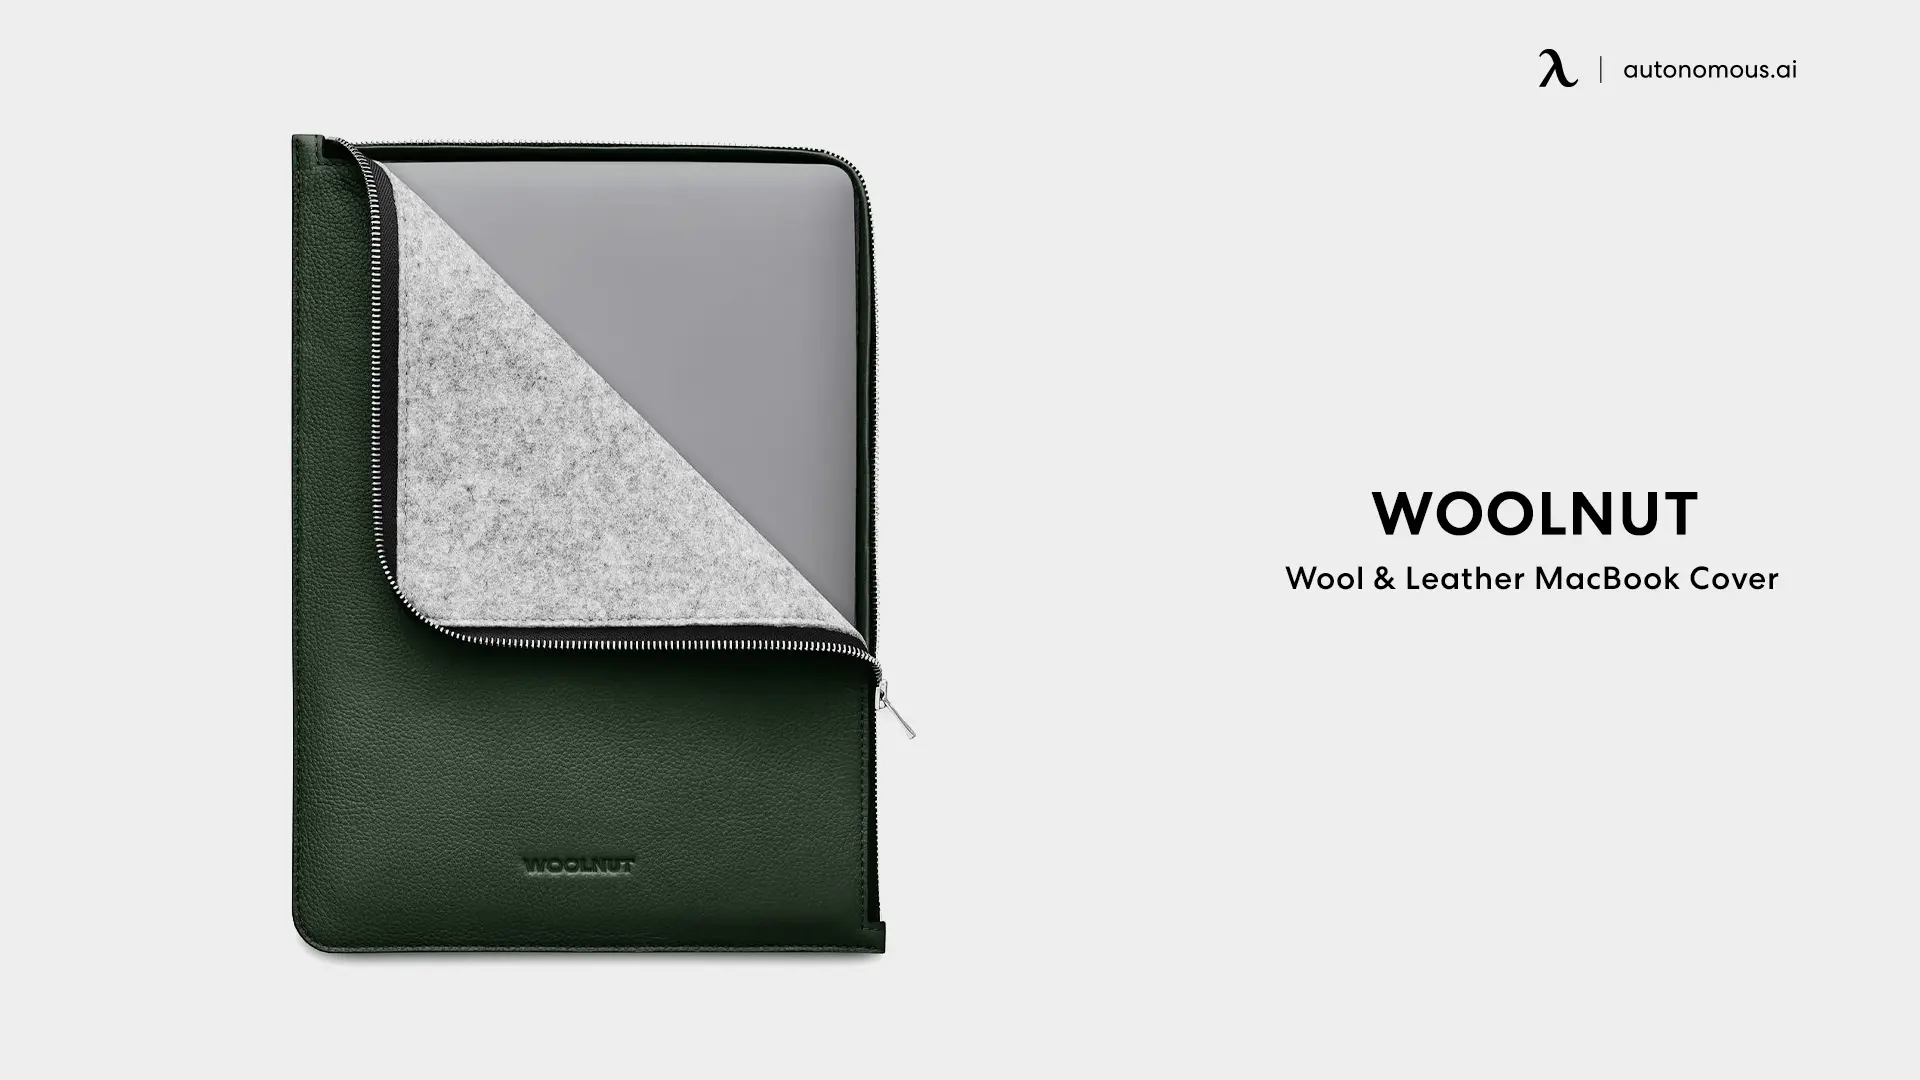 Woolnut Wool & Leather MacBook Cover (13-Inch)